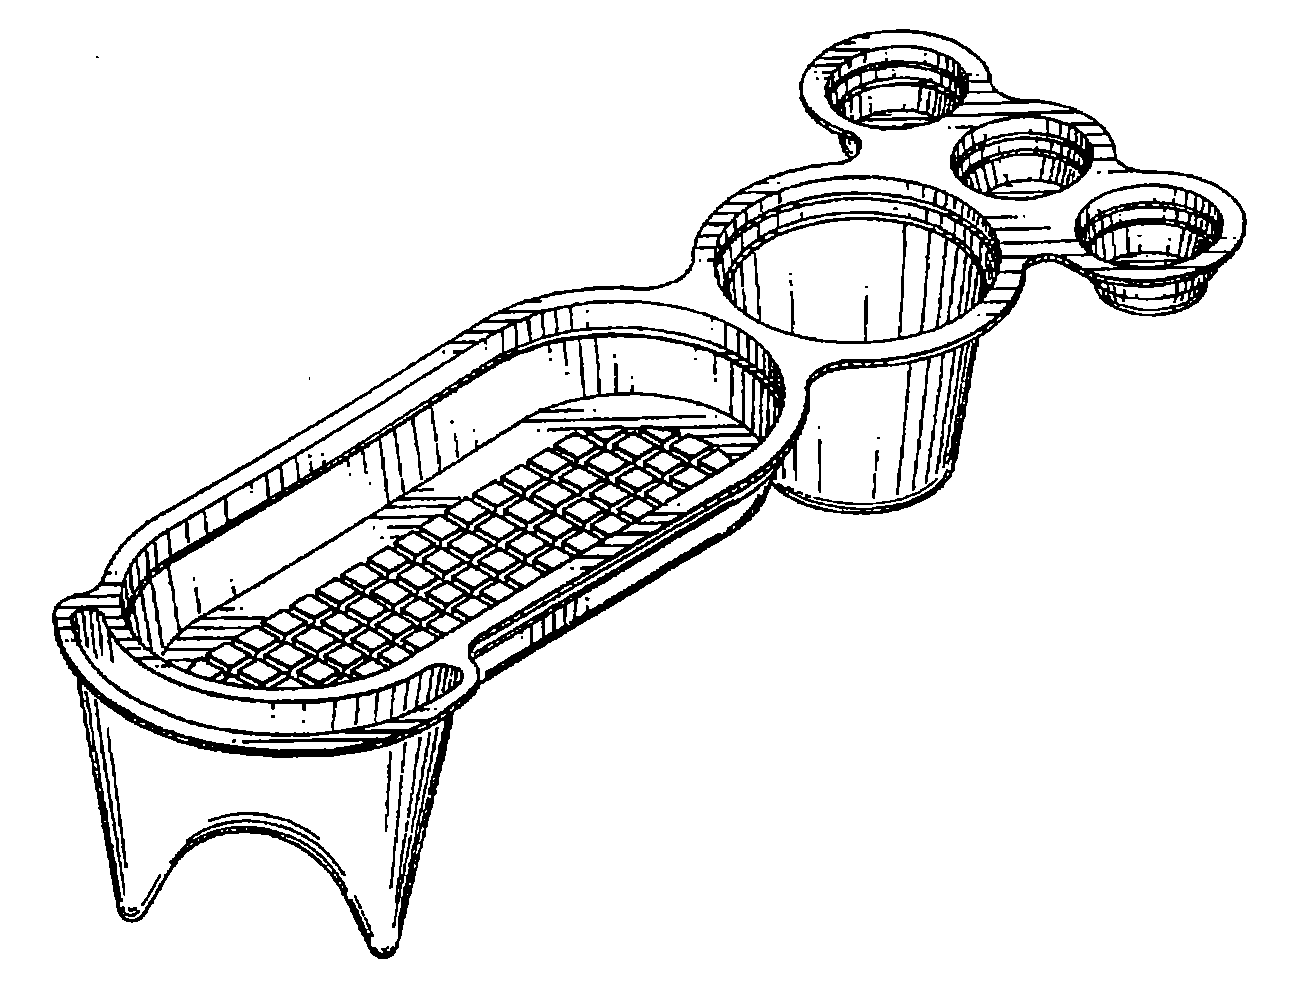 Example of a design for a tray with legs or raised support.
